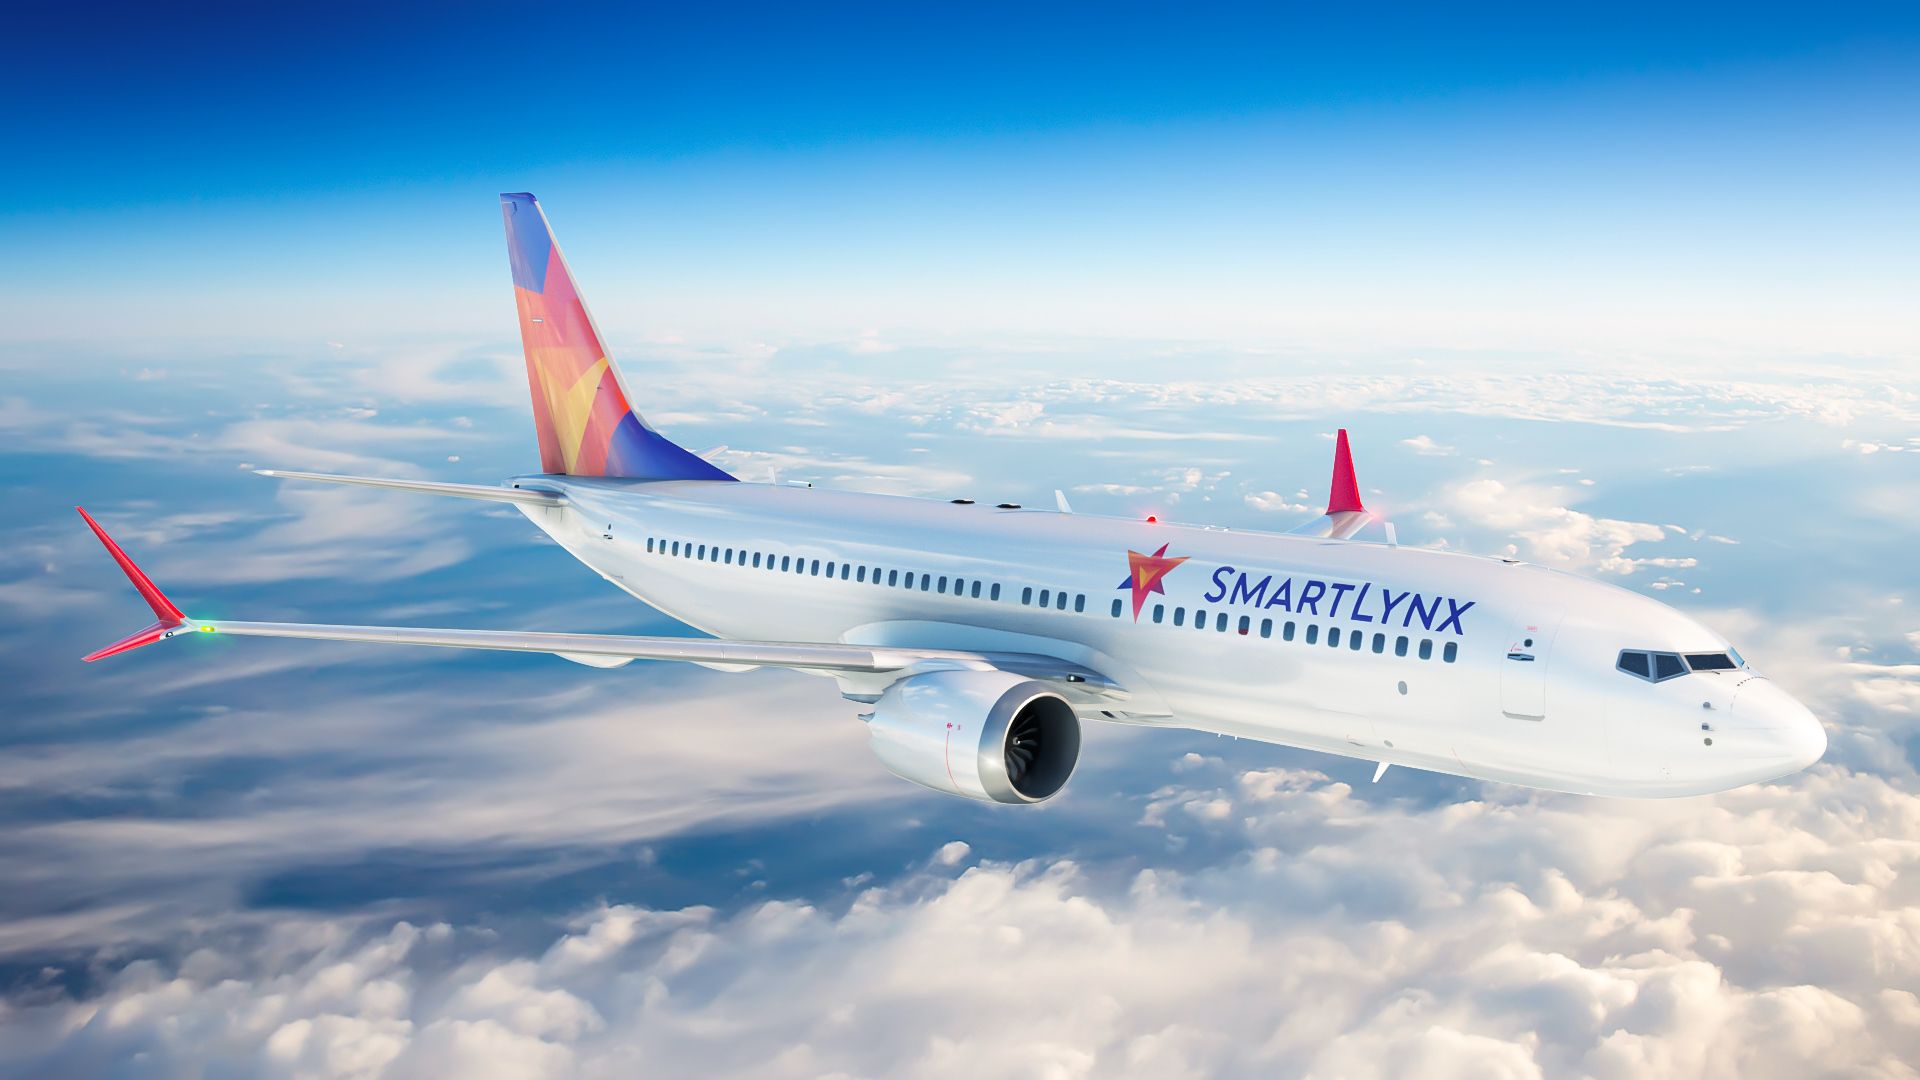 SmartLynx Airlines to expand its fleet by adding new aircraft type